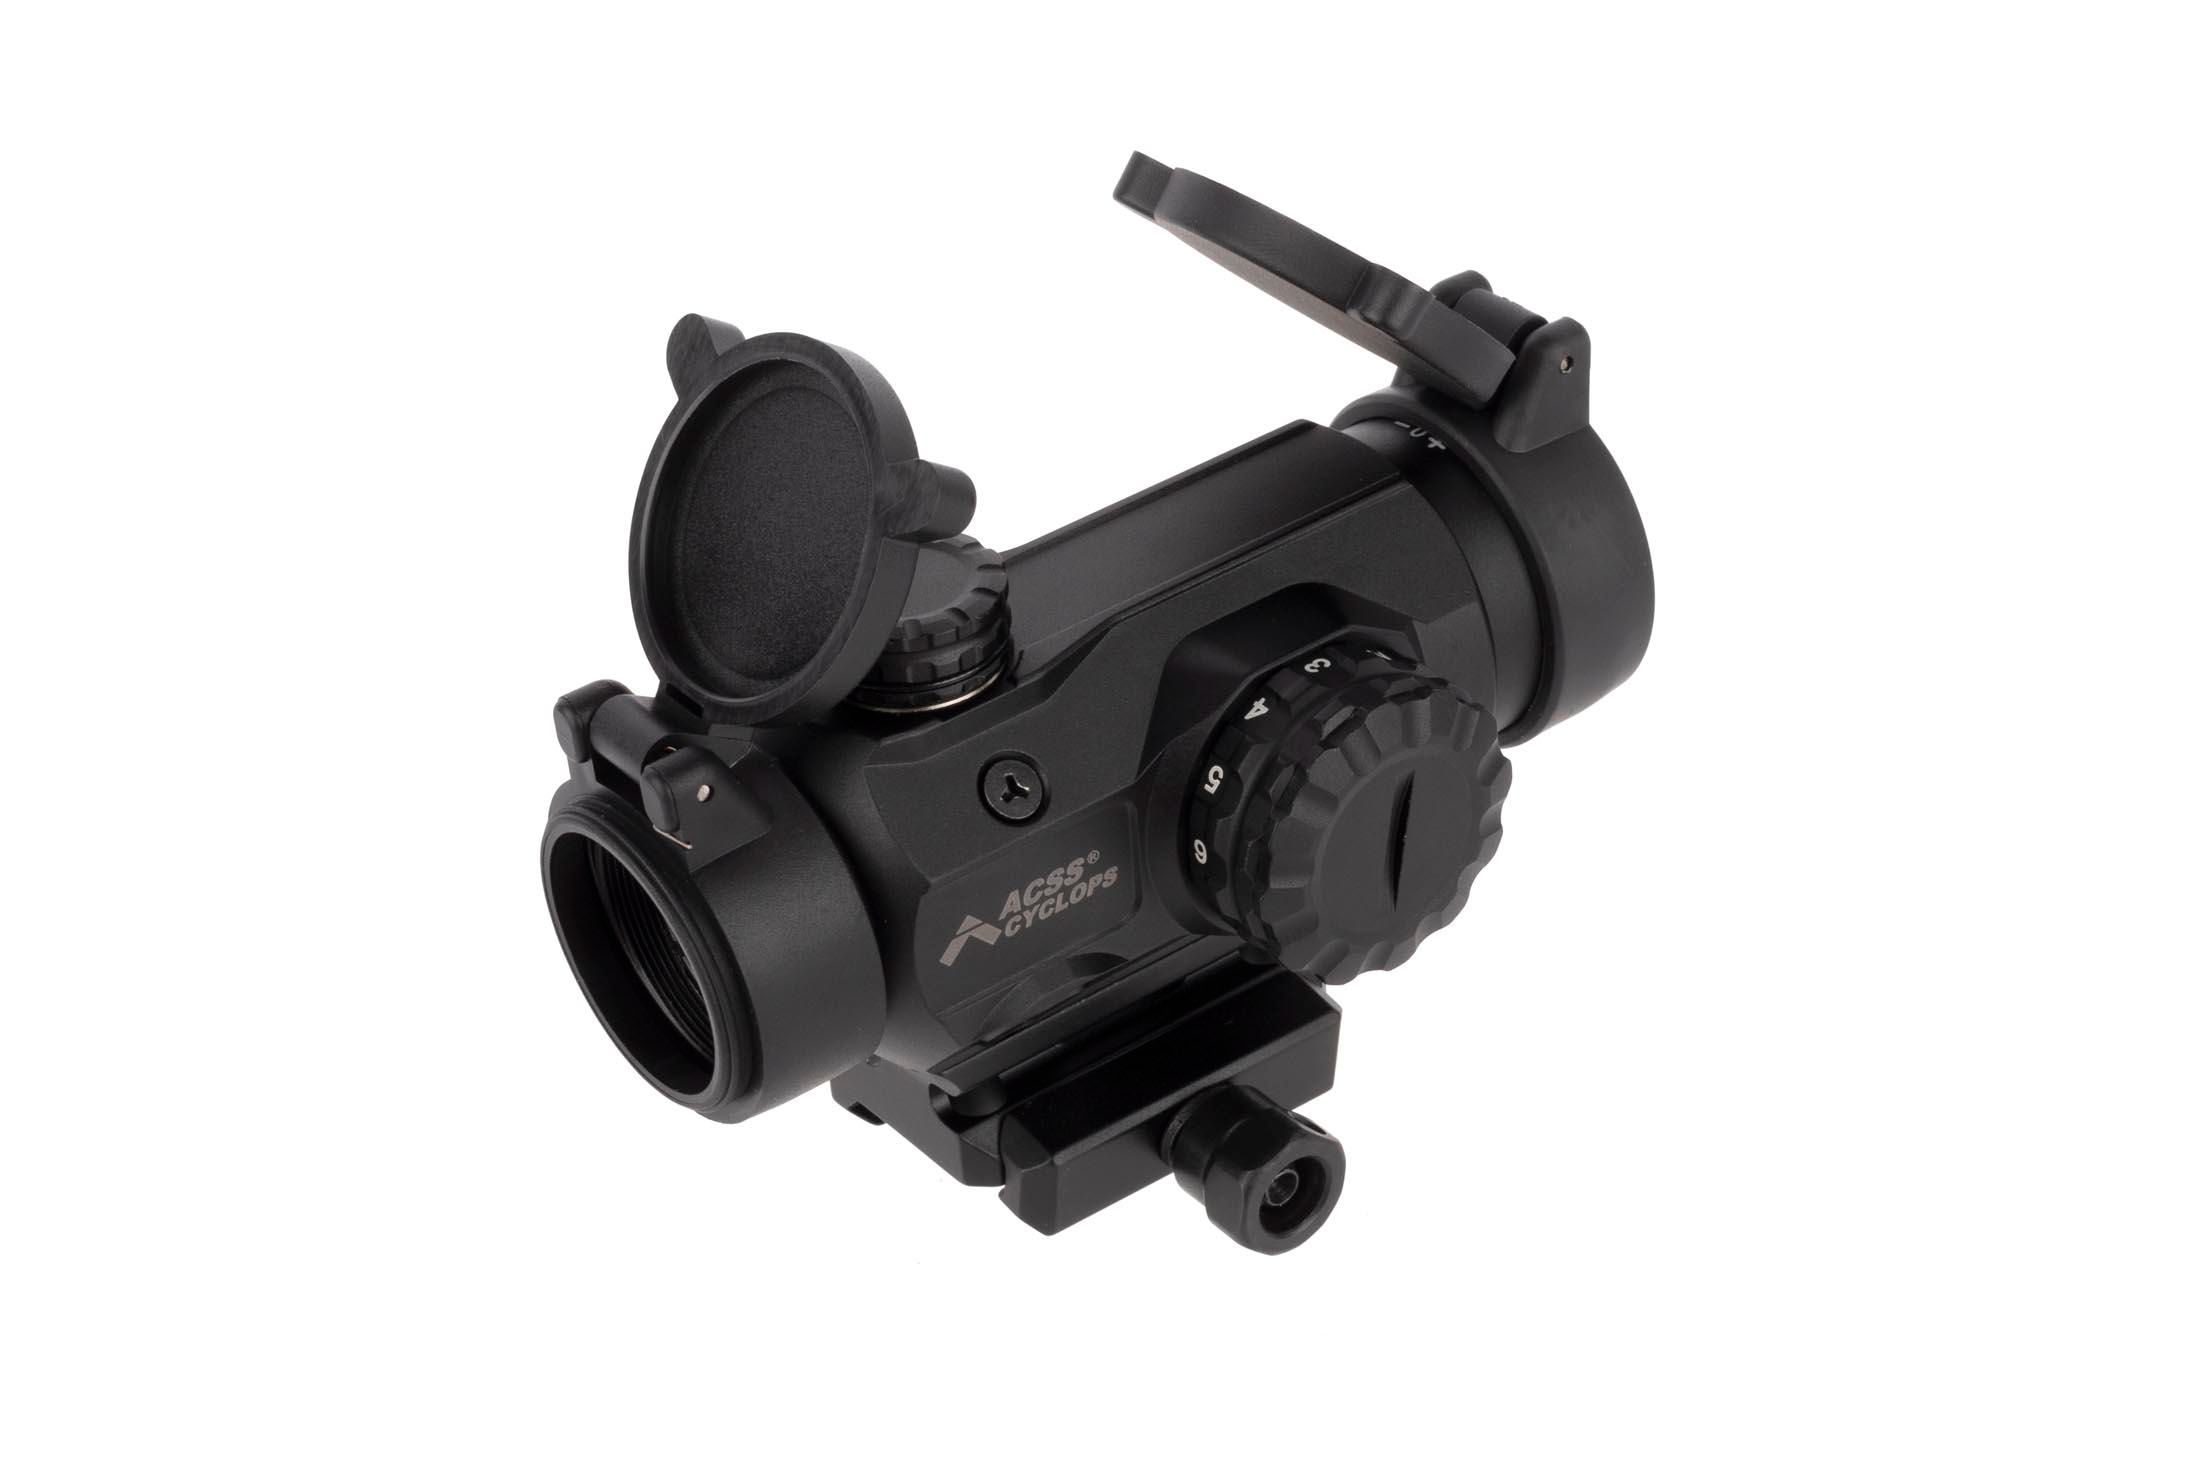 Primary Arms SLx Compact 1x20mm Prism Scope - ACSS Cyclops 